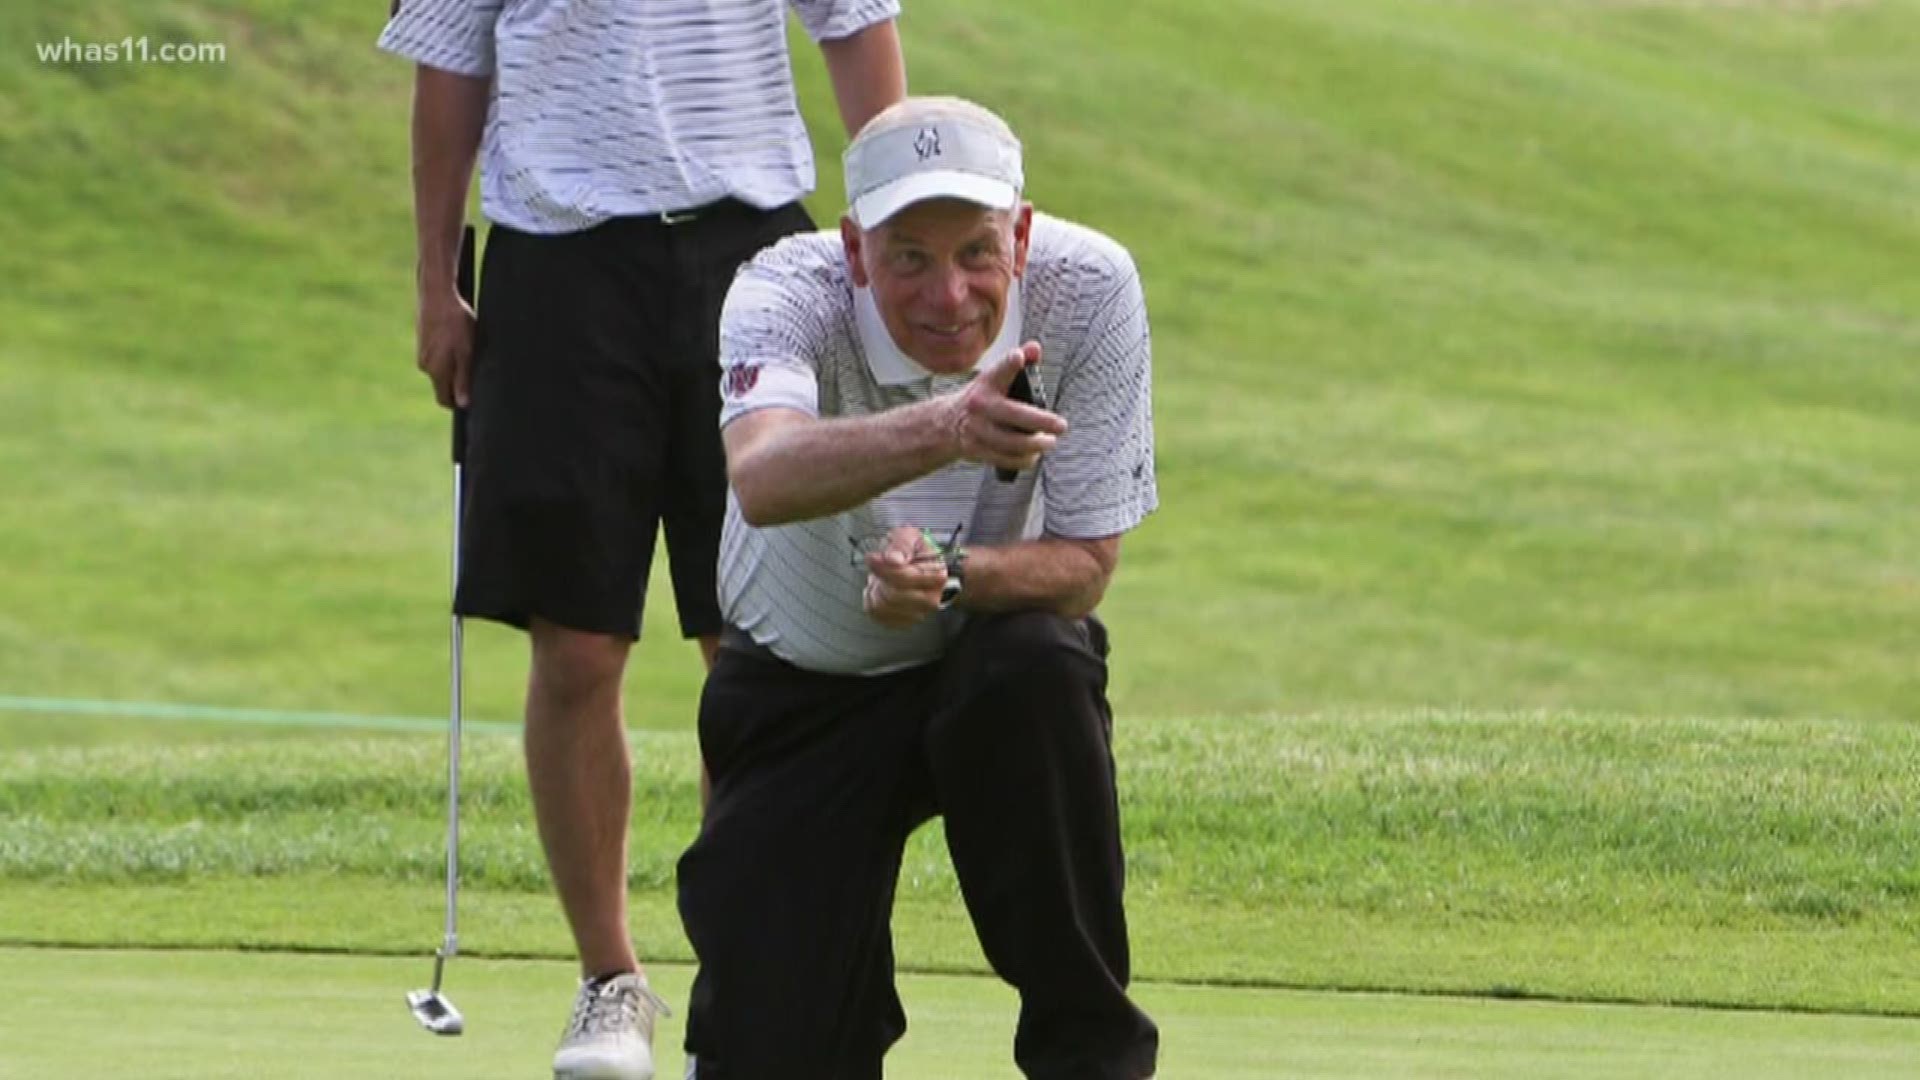 For decades, Ernie Denham could be seen roaming the fairways and greens throughout the Louisville area.